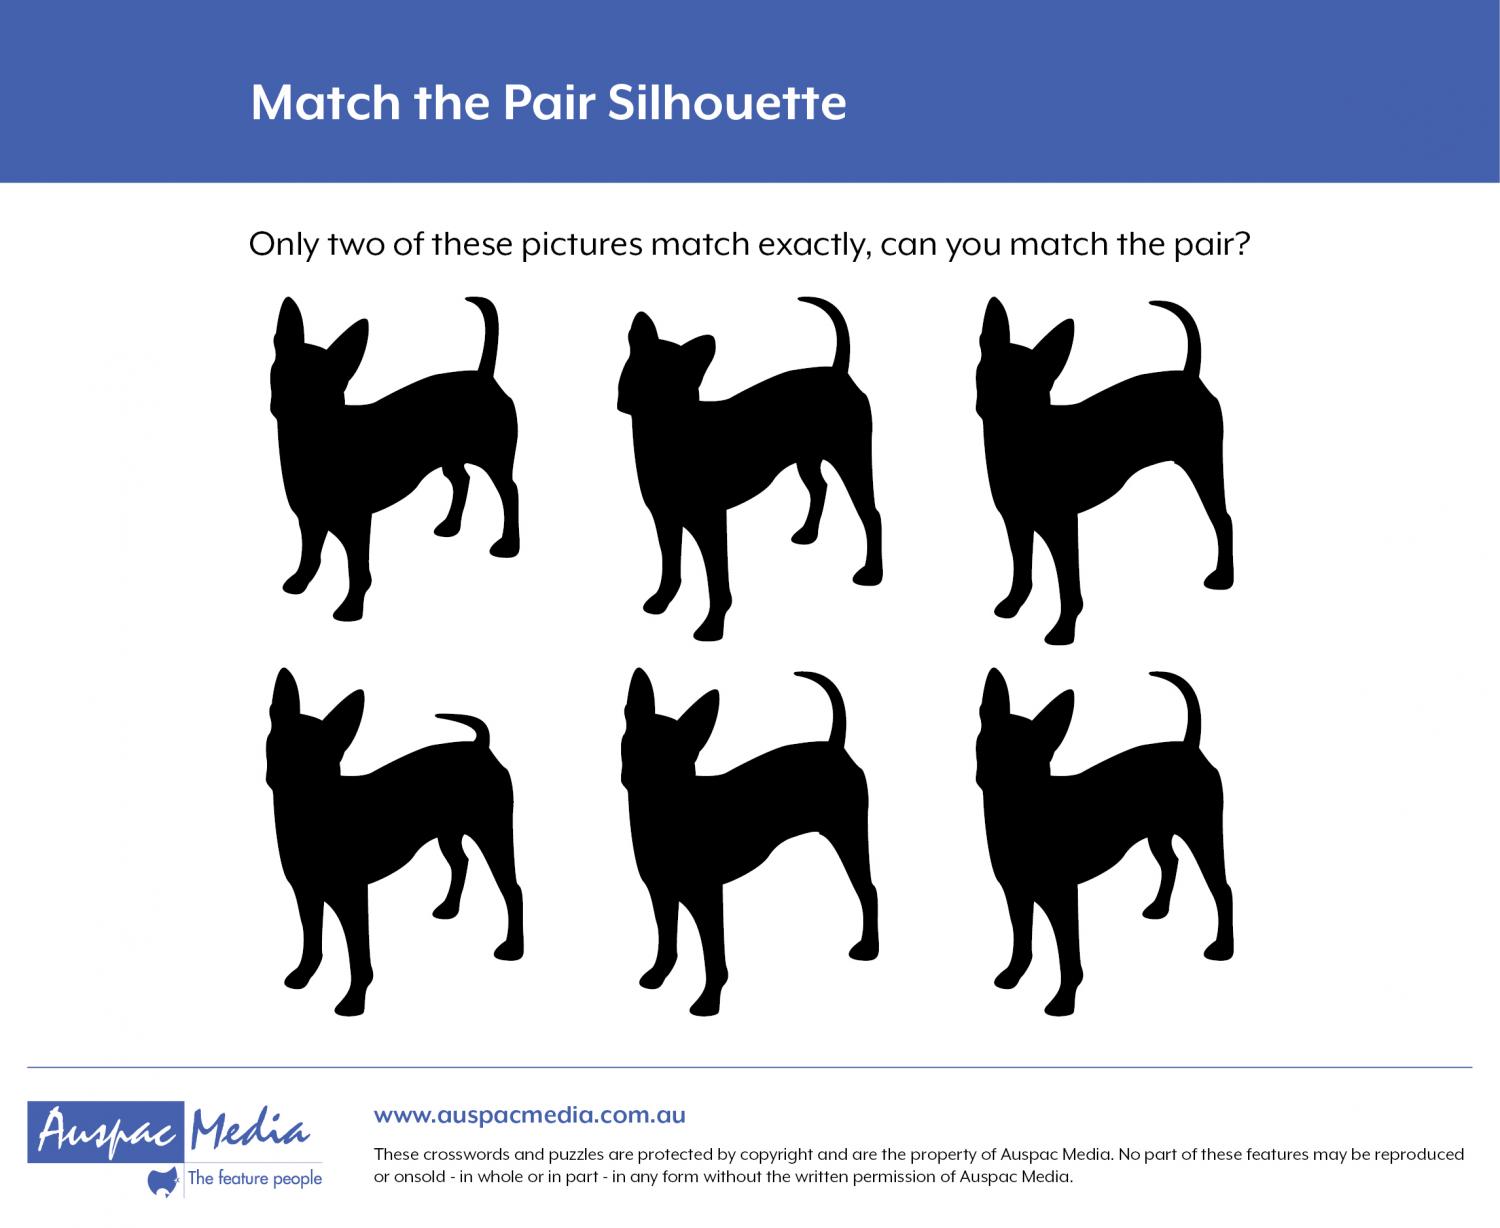 Thumbnail for Match the Pair Silhouette